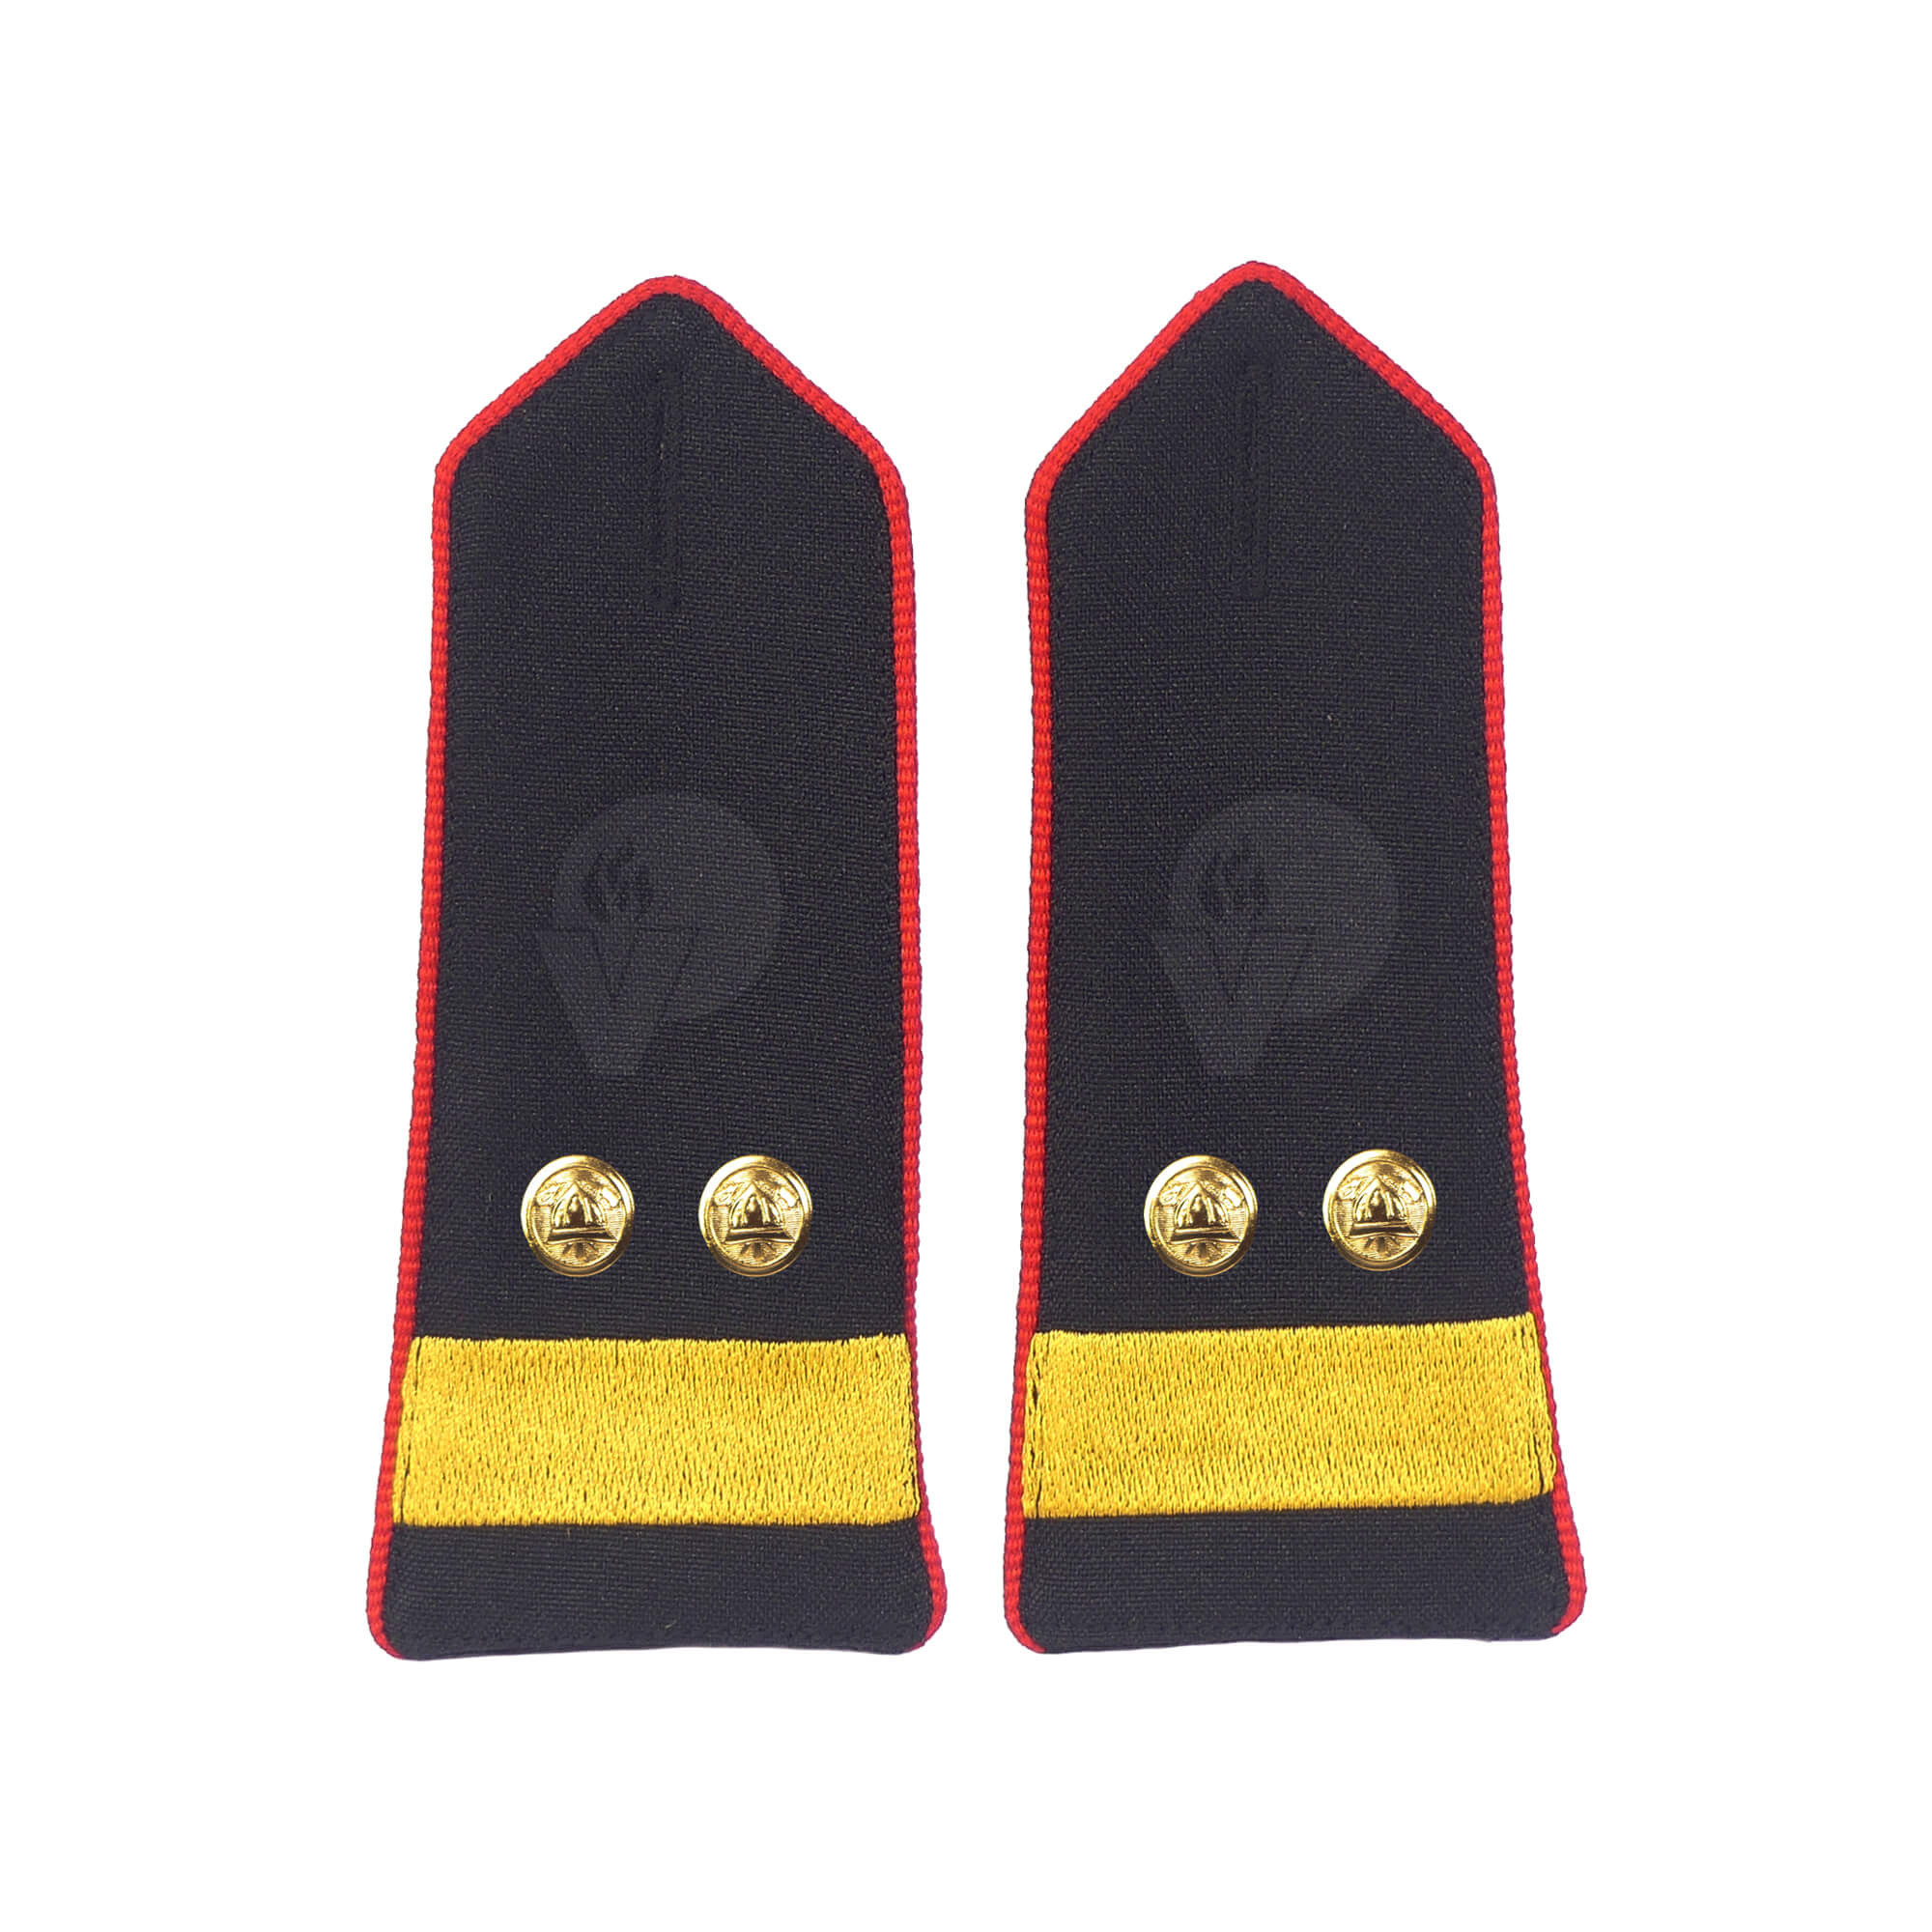 Rank Marks for Professional Firefighters, First Class Junior Fire Officer